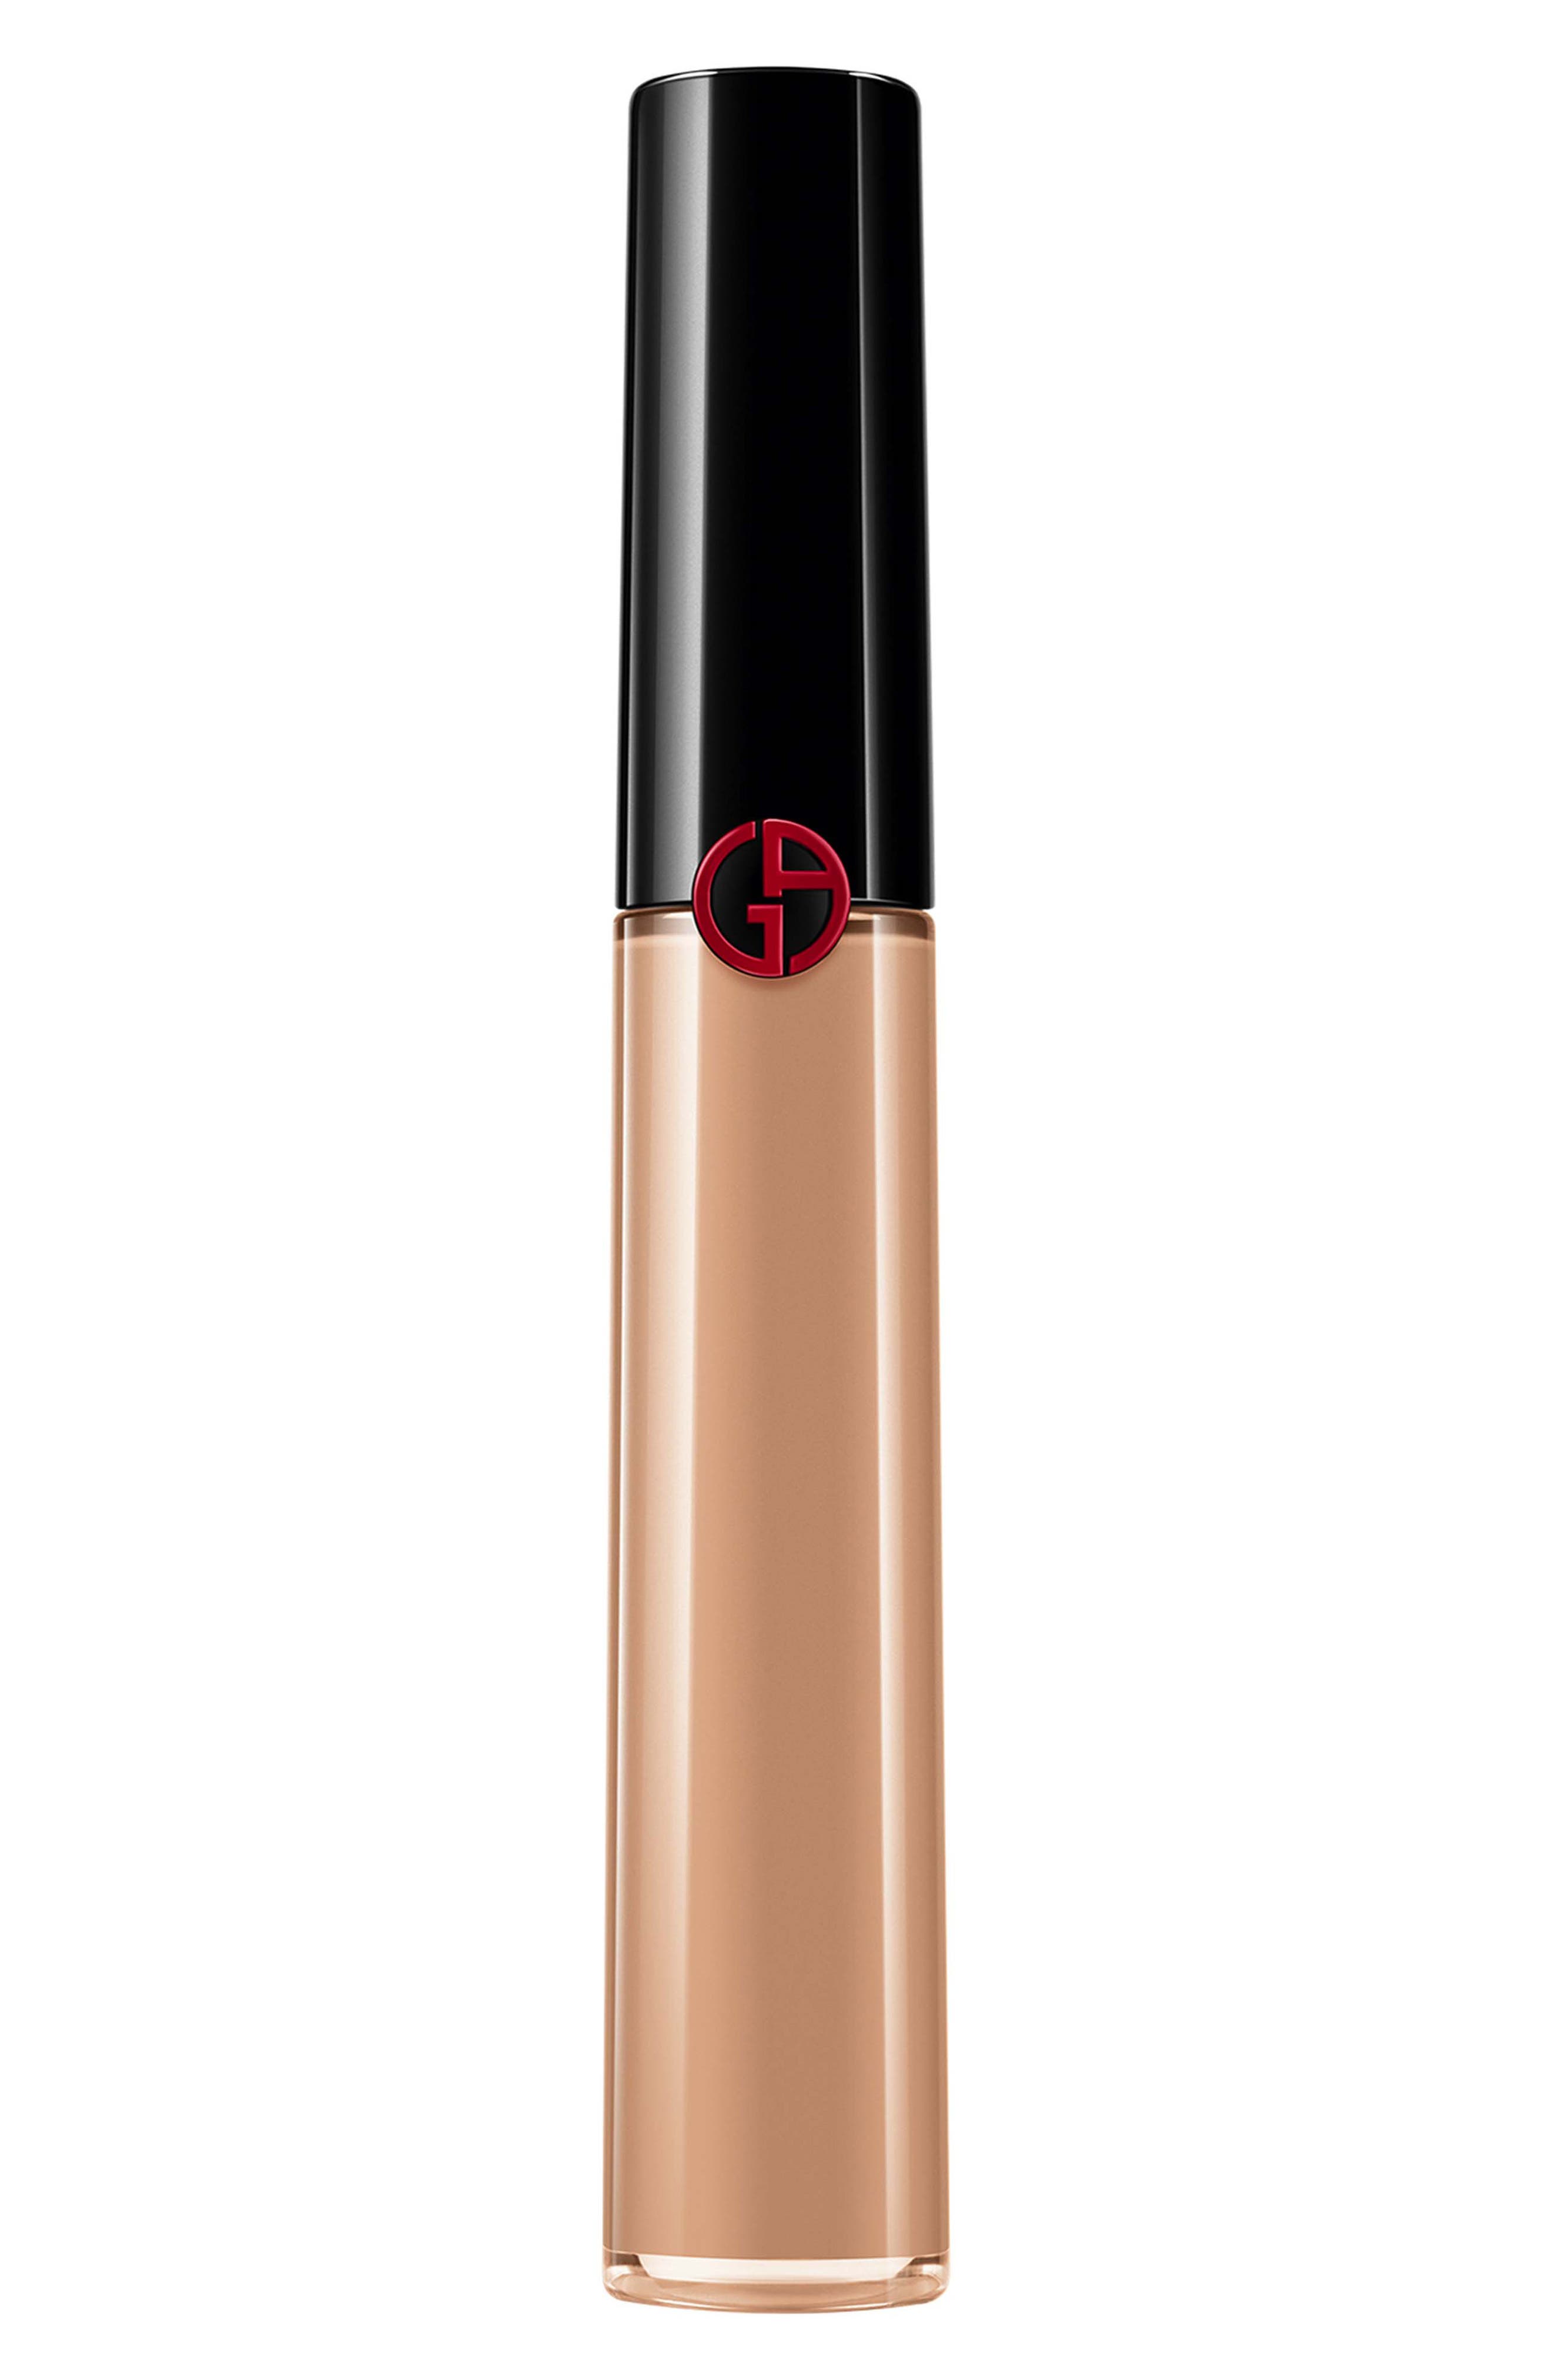 Giorgio Armani Power Fabric Stretchable Full Coverage Concealer in 05.5 - Med/neutral Undertone